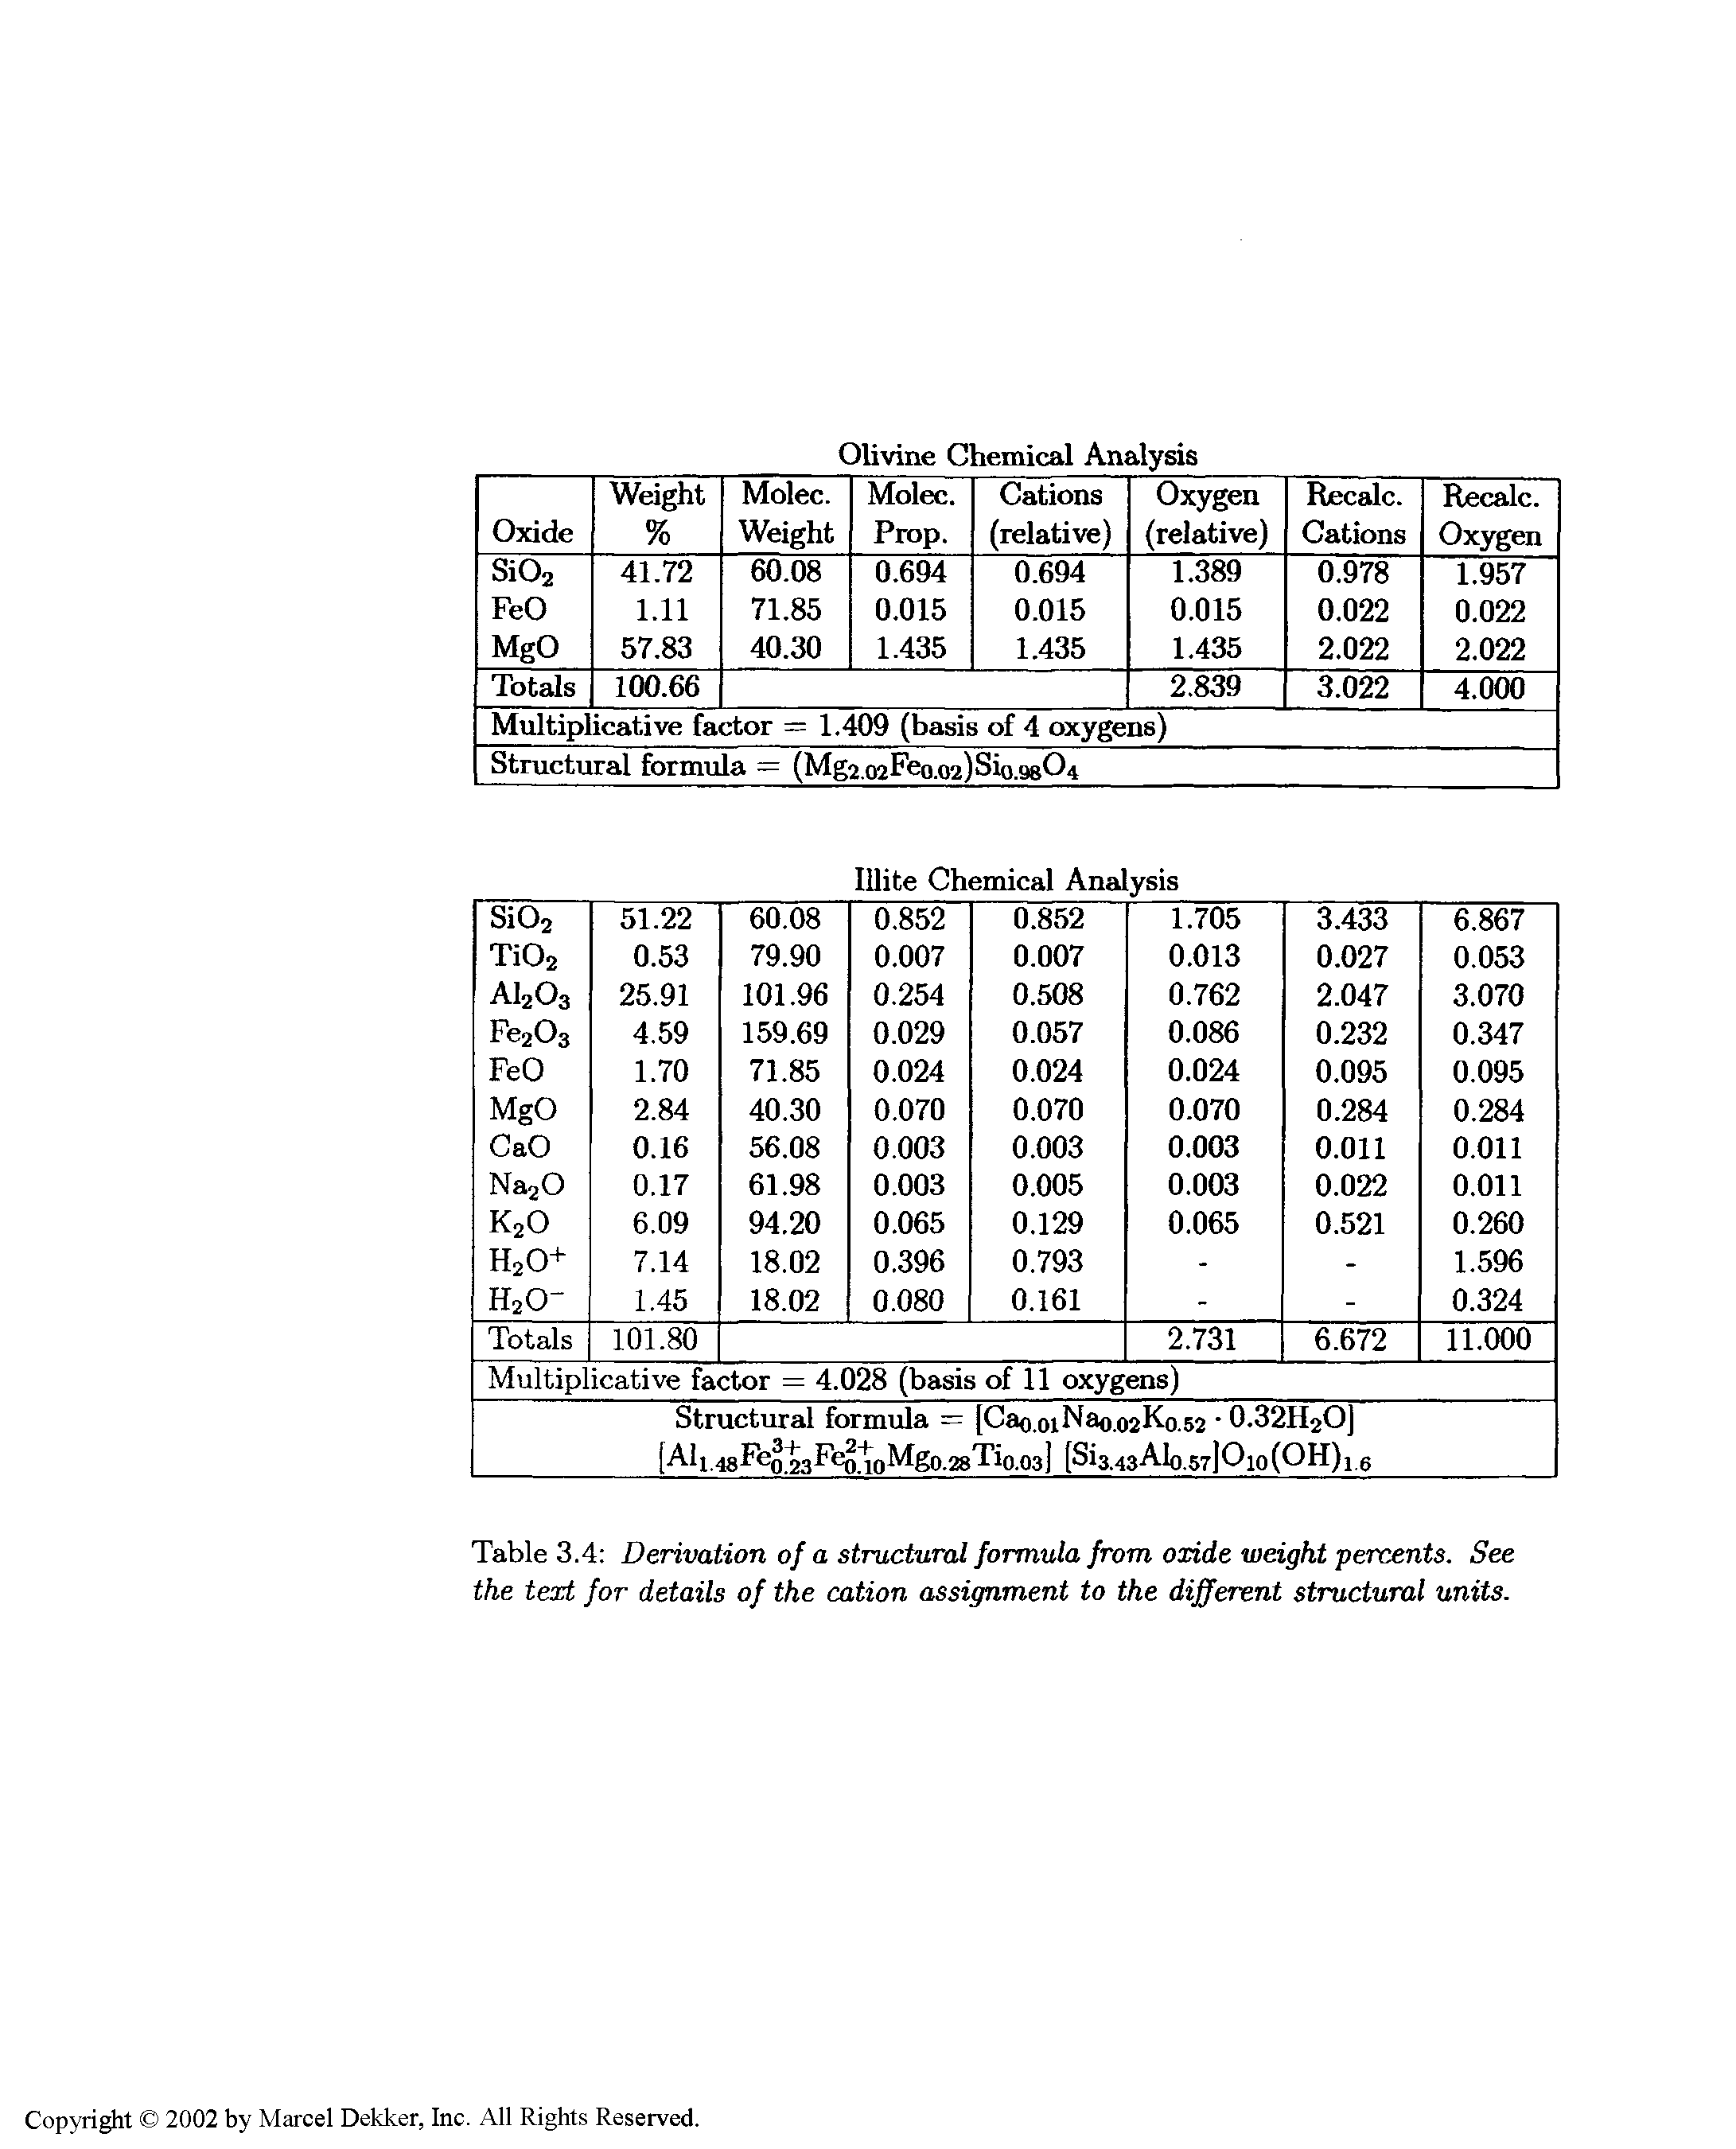 Table 3.4 Derivation of a structural formula from oodde weight percents. See the text for details of the cation assignment to the different structural units.